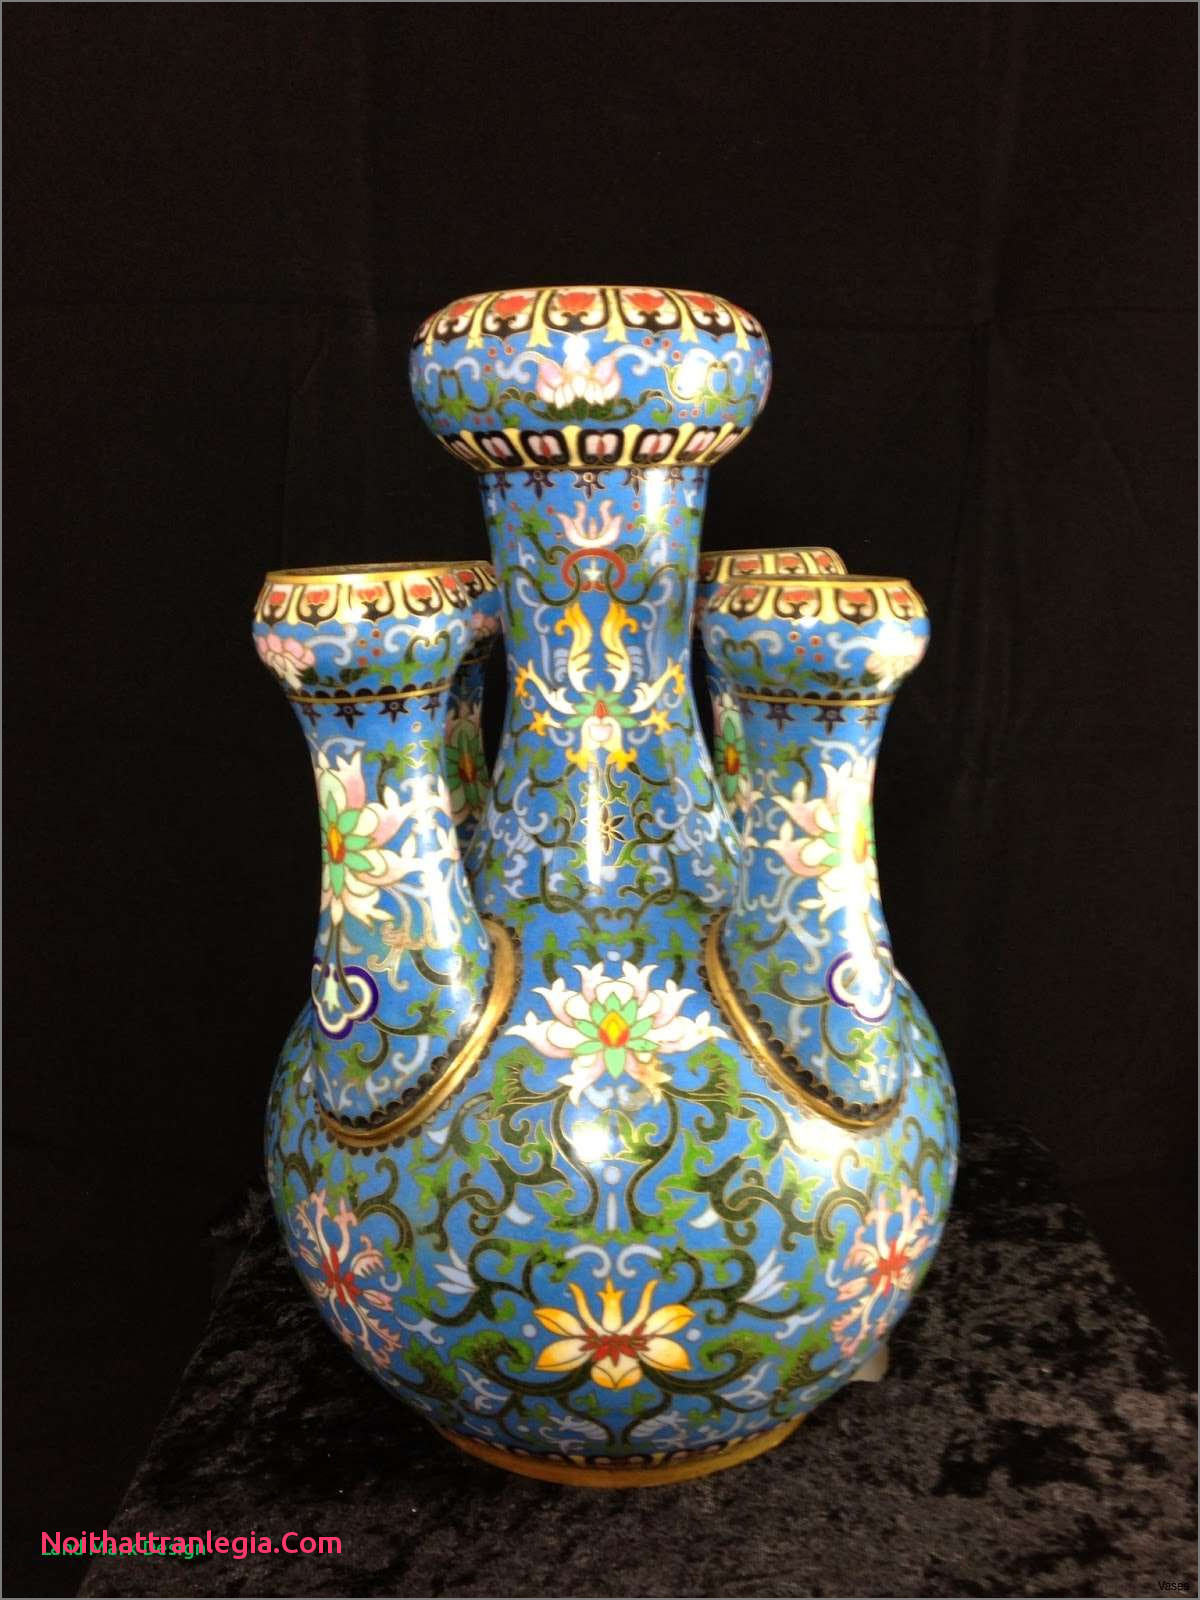 10 Awesome Large Cobalt Blue Vase 2024 free download large cobalt blue vase of 20 chinese antique vase noithattranlegia vases design throughout 213 1h vases antique asian the increased trade of chinese ware during 16th century has significantl